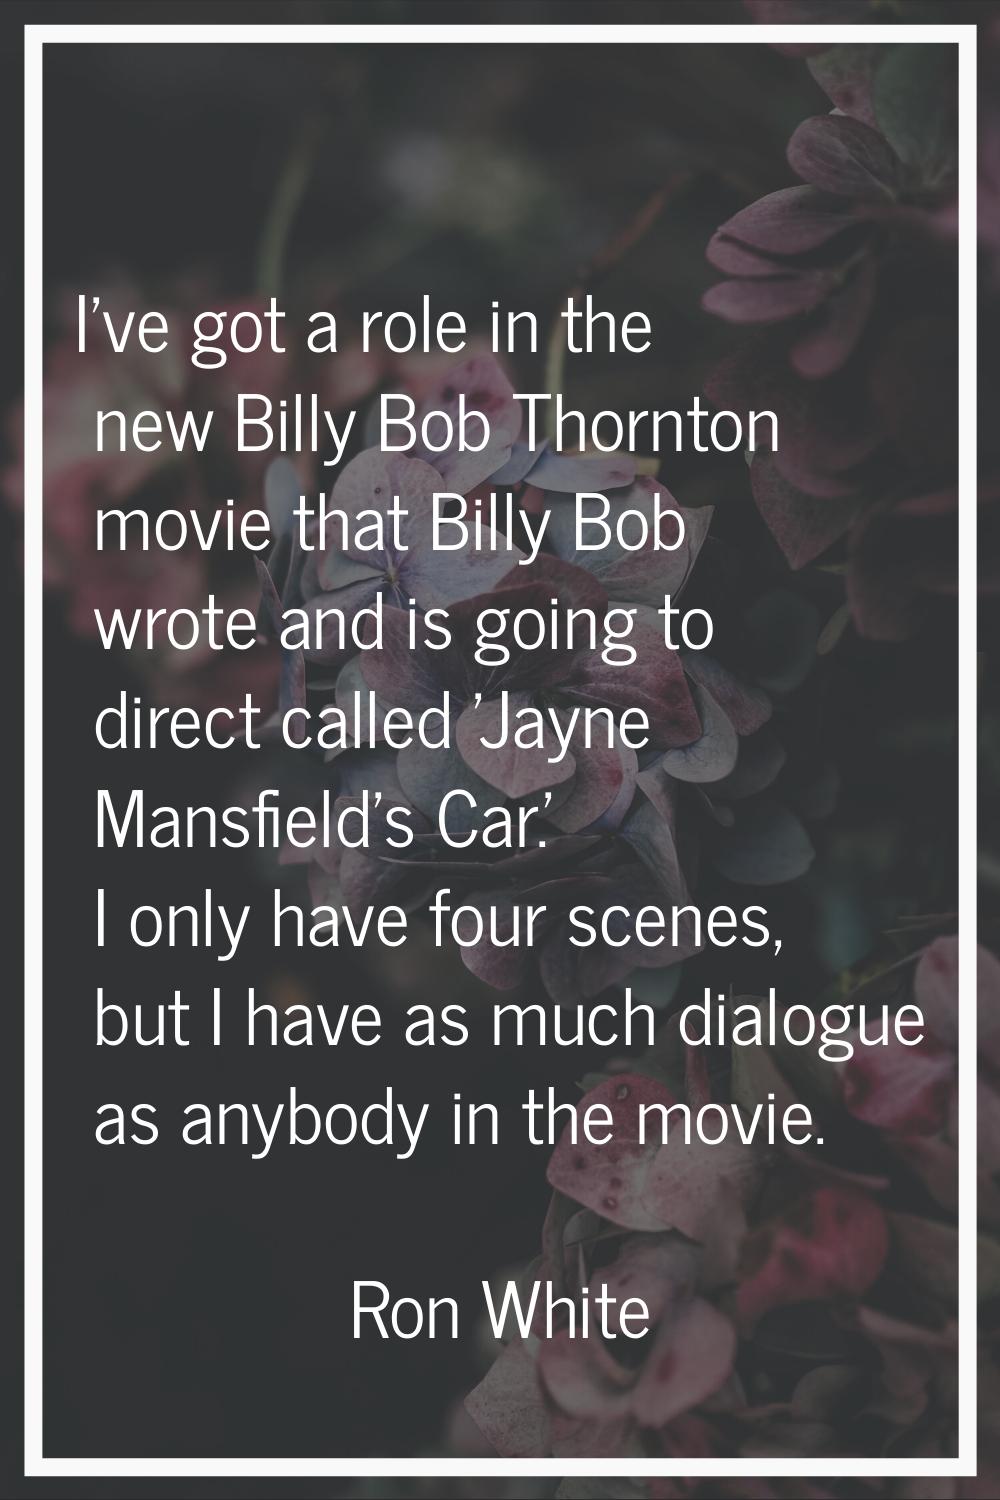 I've got a role in the new Billy Bob Thornton movie that Billy Bob wrote and is going to direct cal